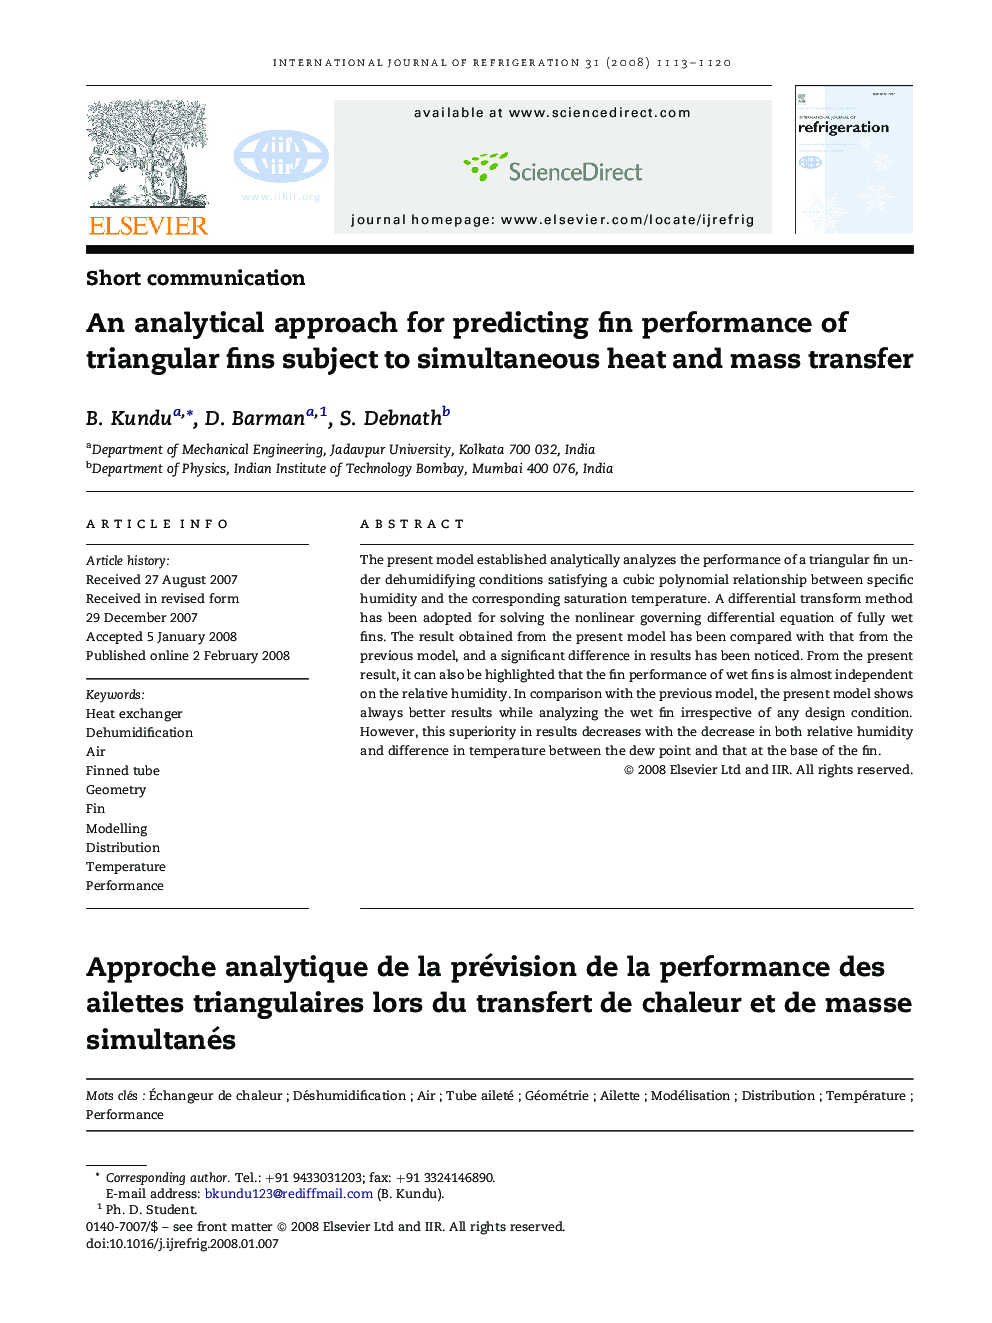 An analytical approach for predicting fin performance of triangular fins subject to simultaneous heat and mass transfer